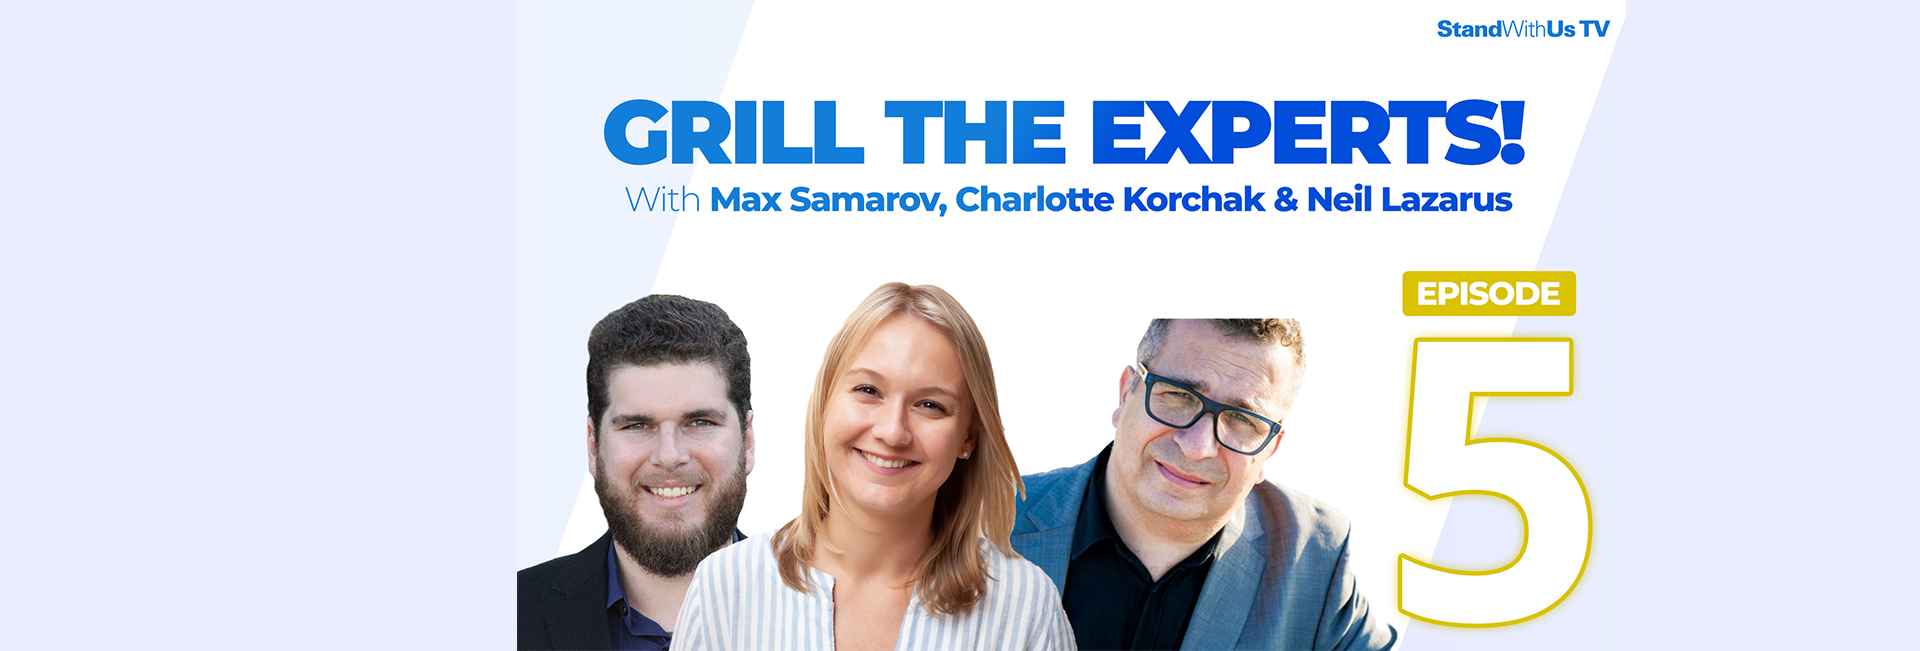 Grill The Experts | Episode 5